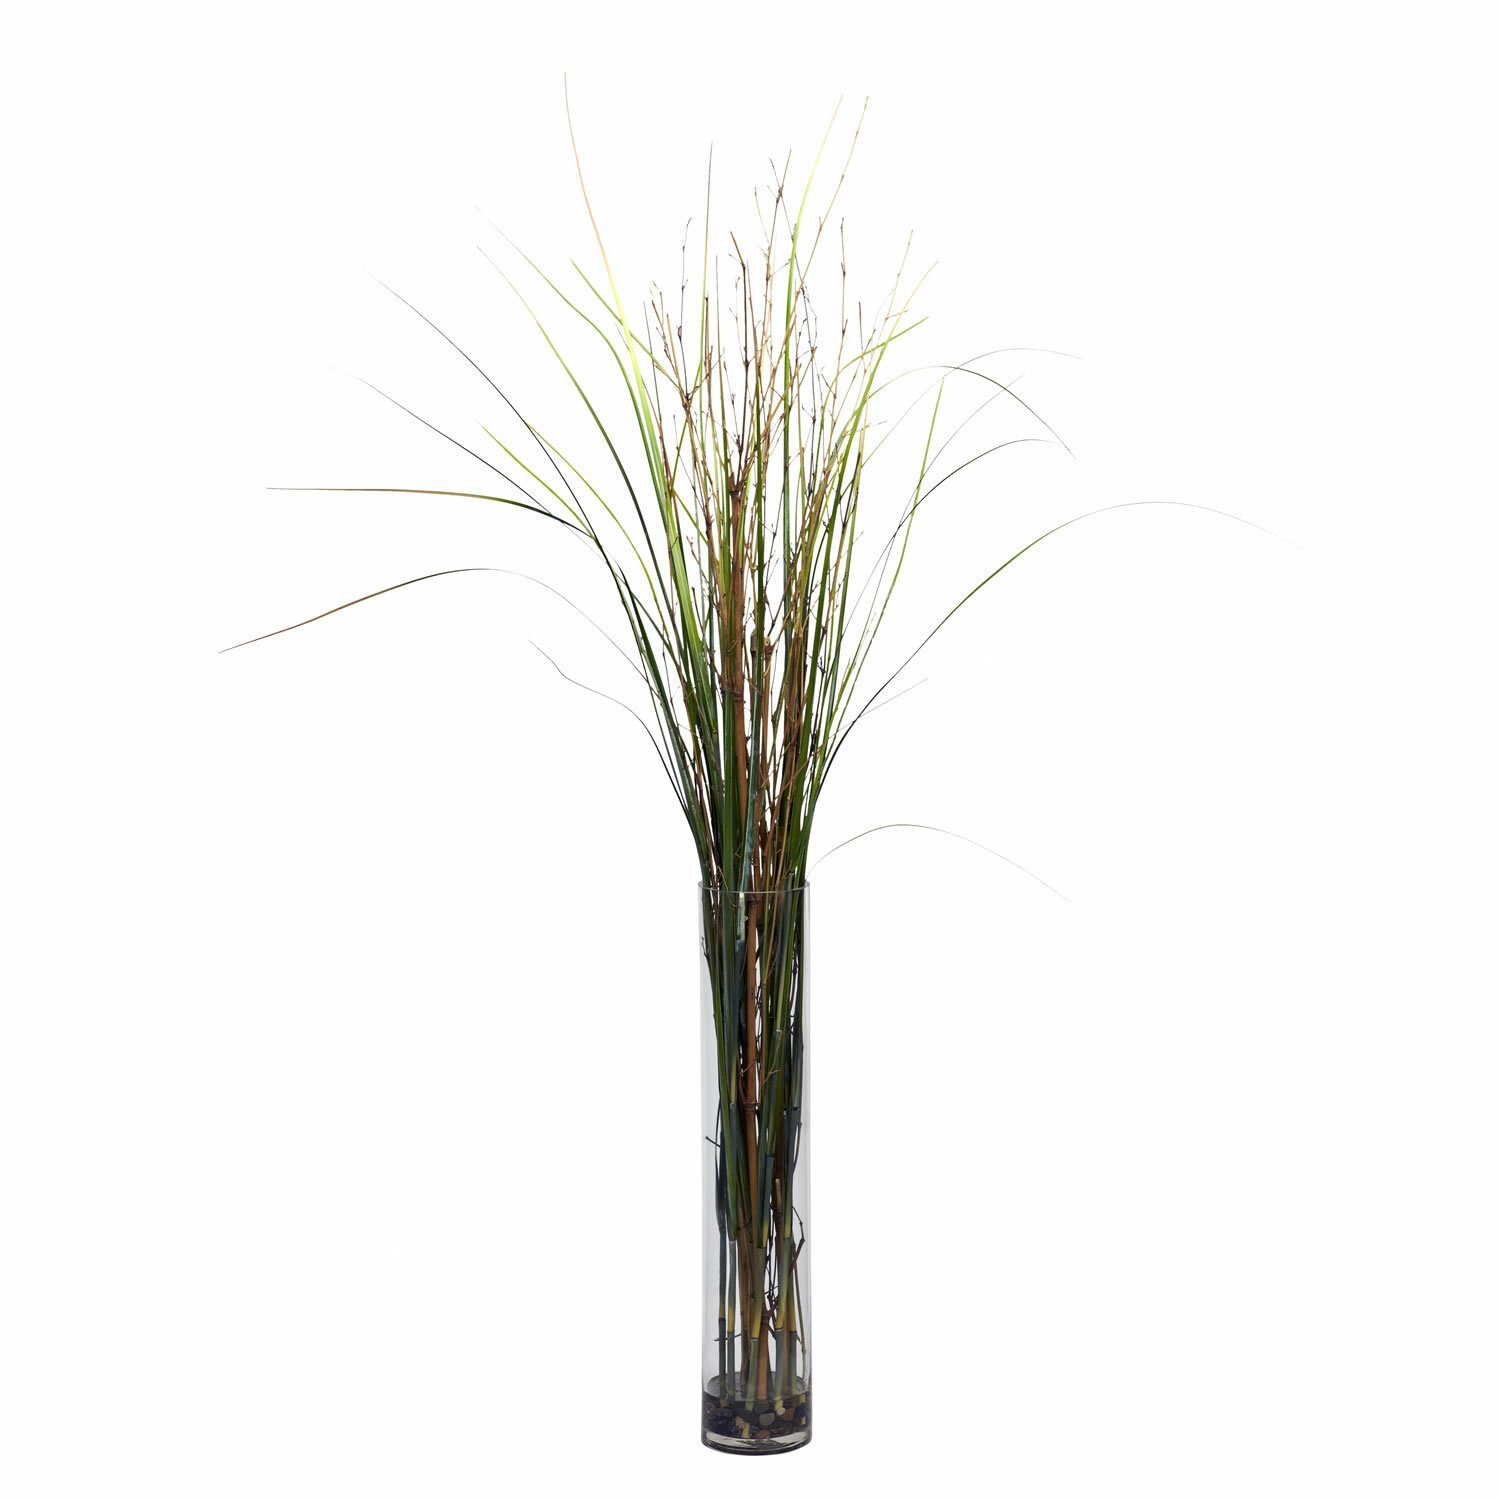 Charlton Home Grass And Bamboo Floor Plant In Decorative Vase